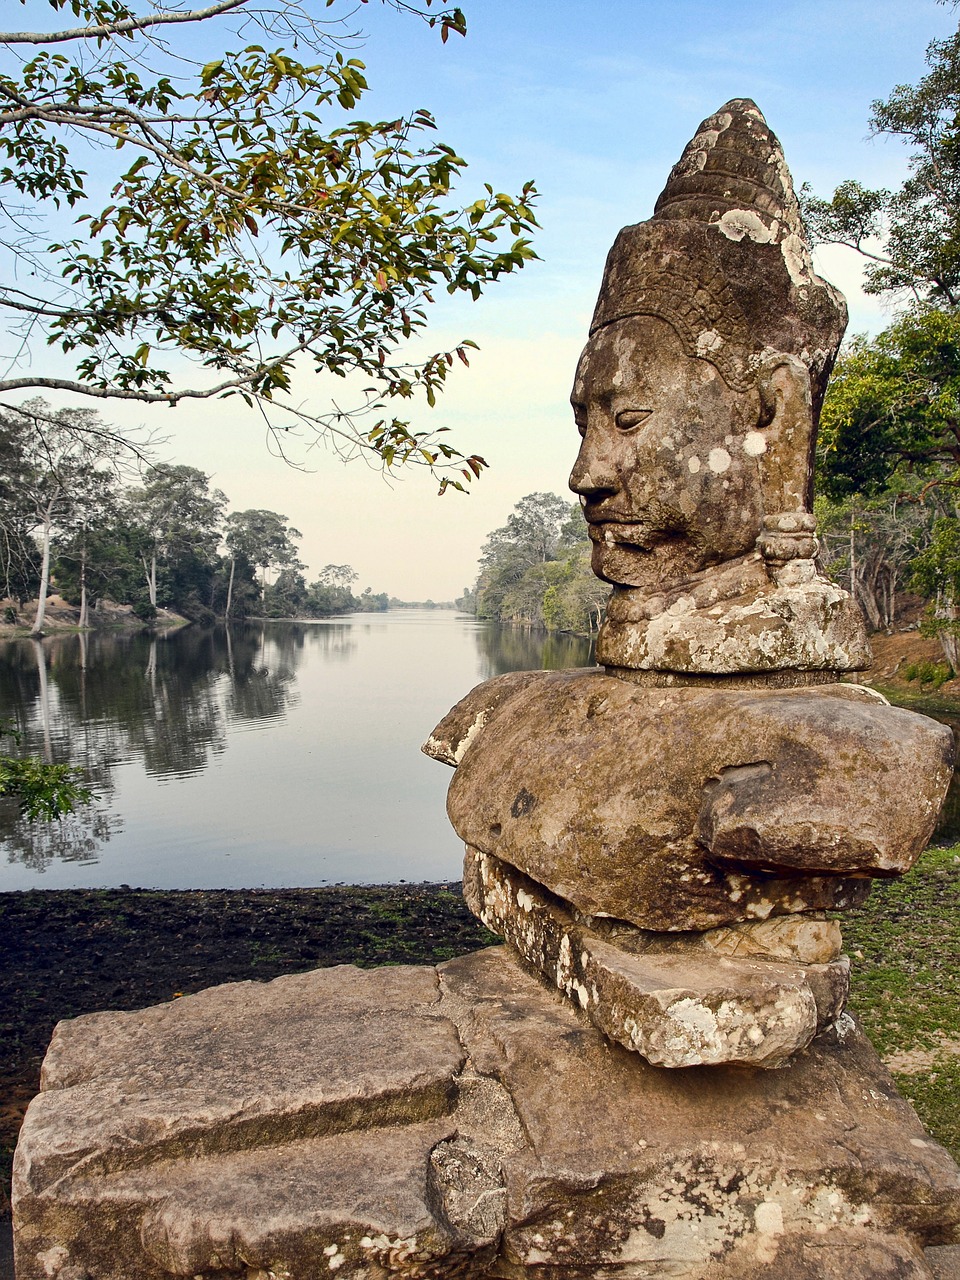 Interesting places in Siem Reap, Siem Reap, Angkor Thom, head of statue, Cambodia